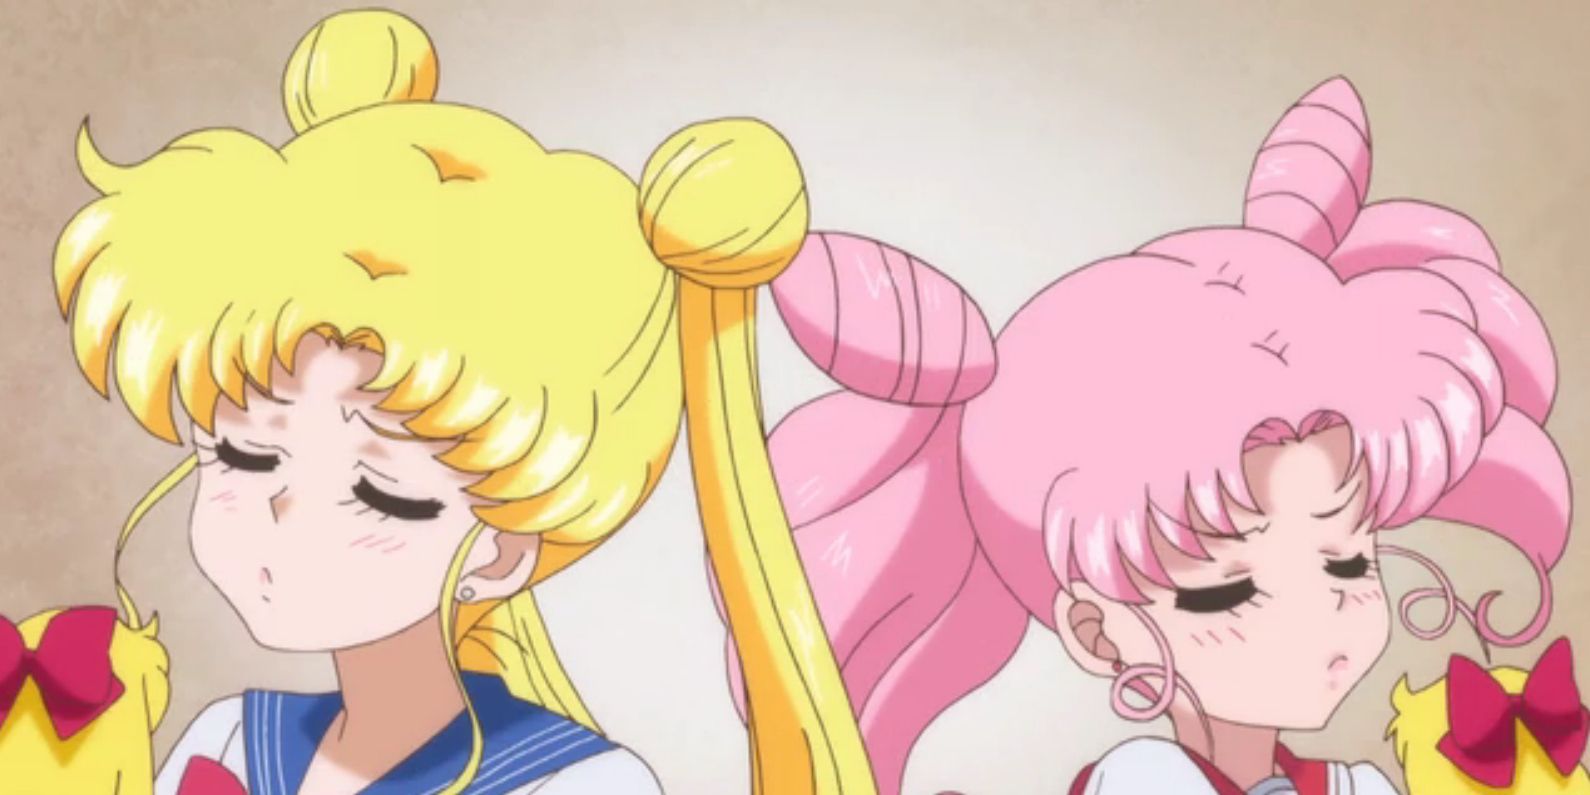 Usagi and Chibiusa from Sailor Moon, facing away from each other angrily